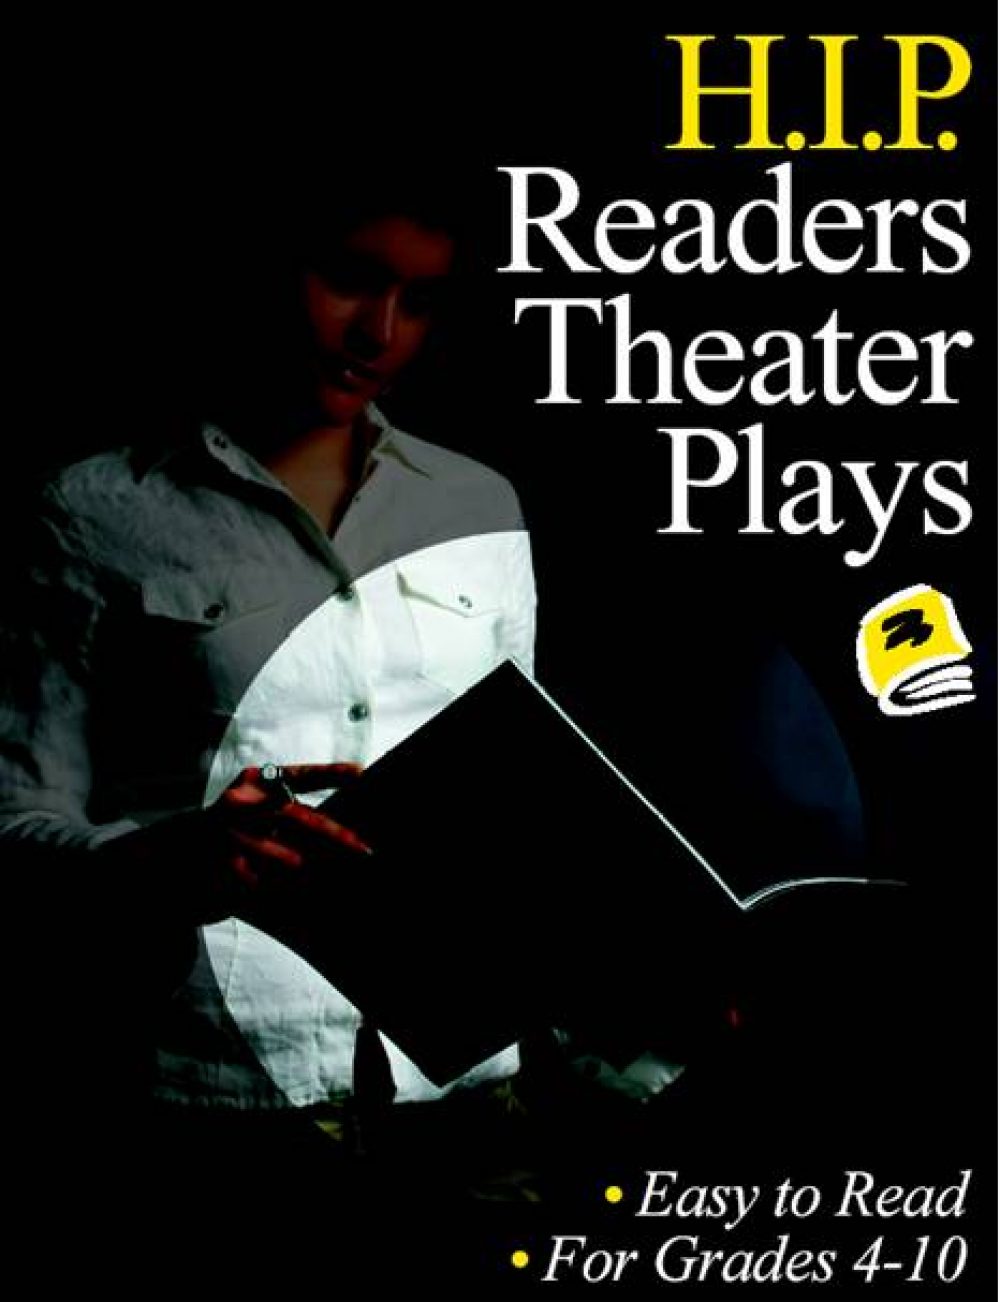 HIP Readers' Theater Plays Book Cover